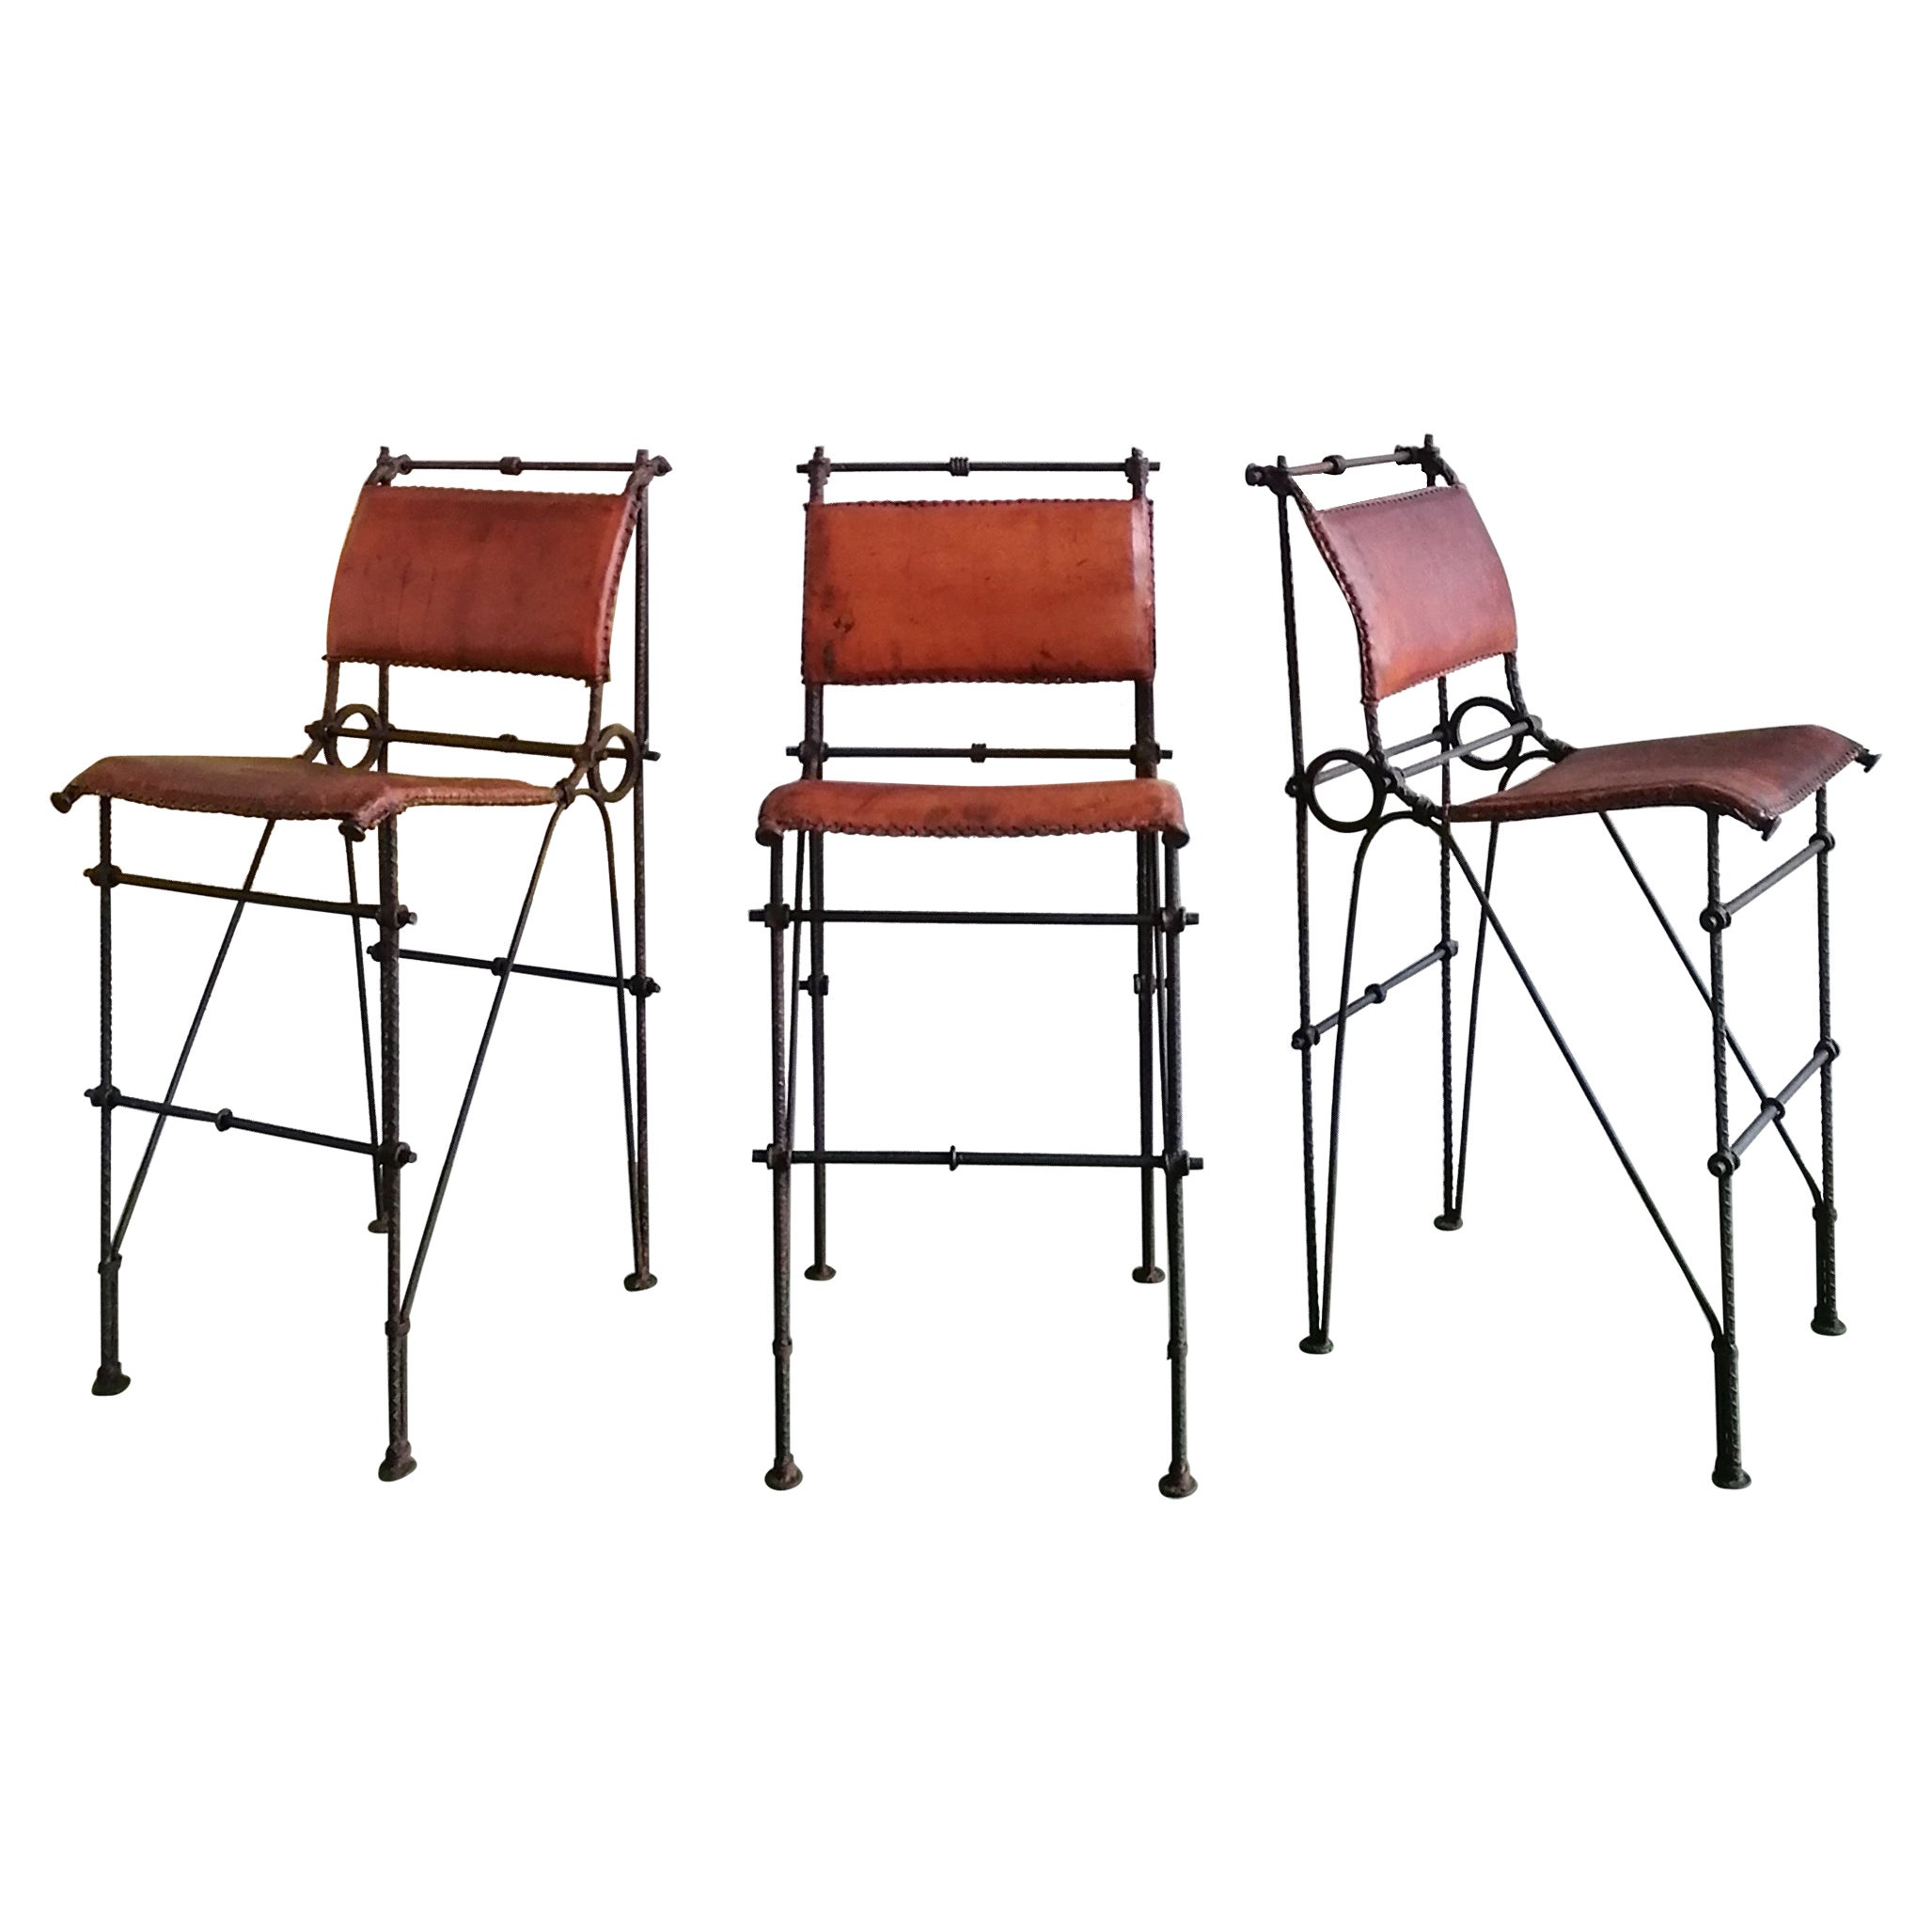 Brutalist iron & hide leather bar stools by Ilana Goor, 1970s. Three available For Sale